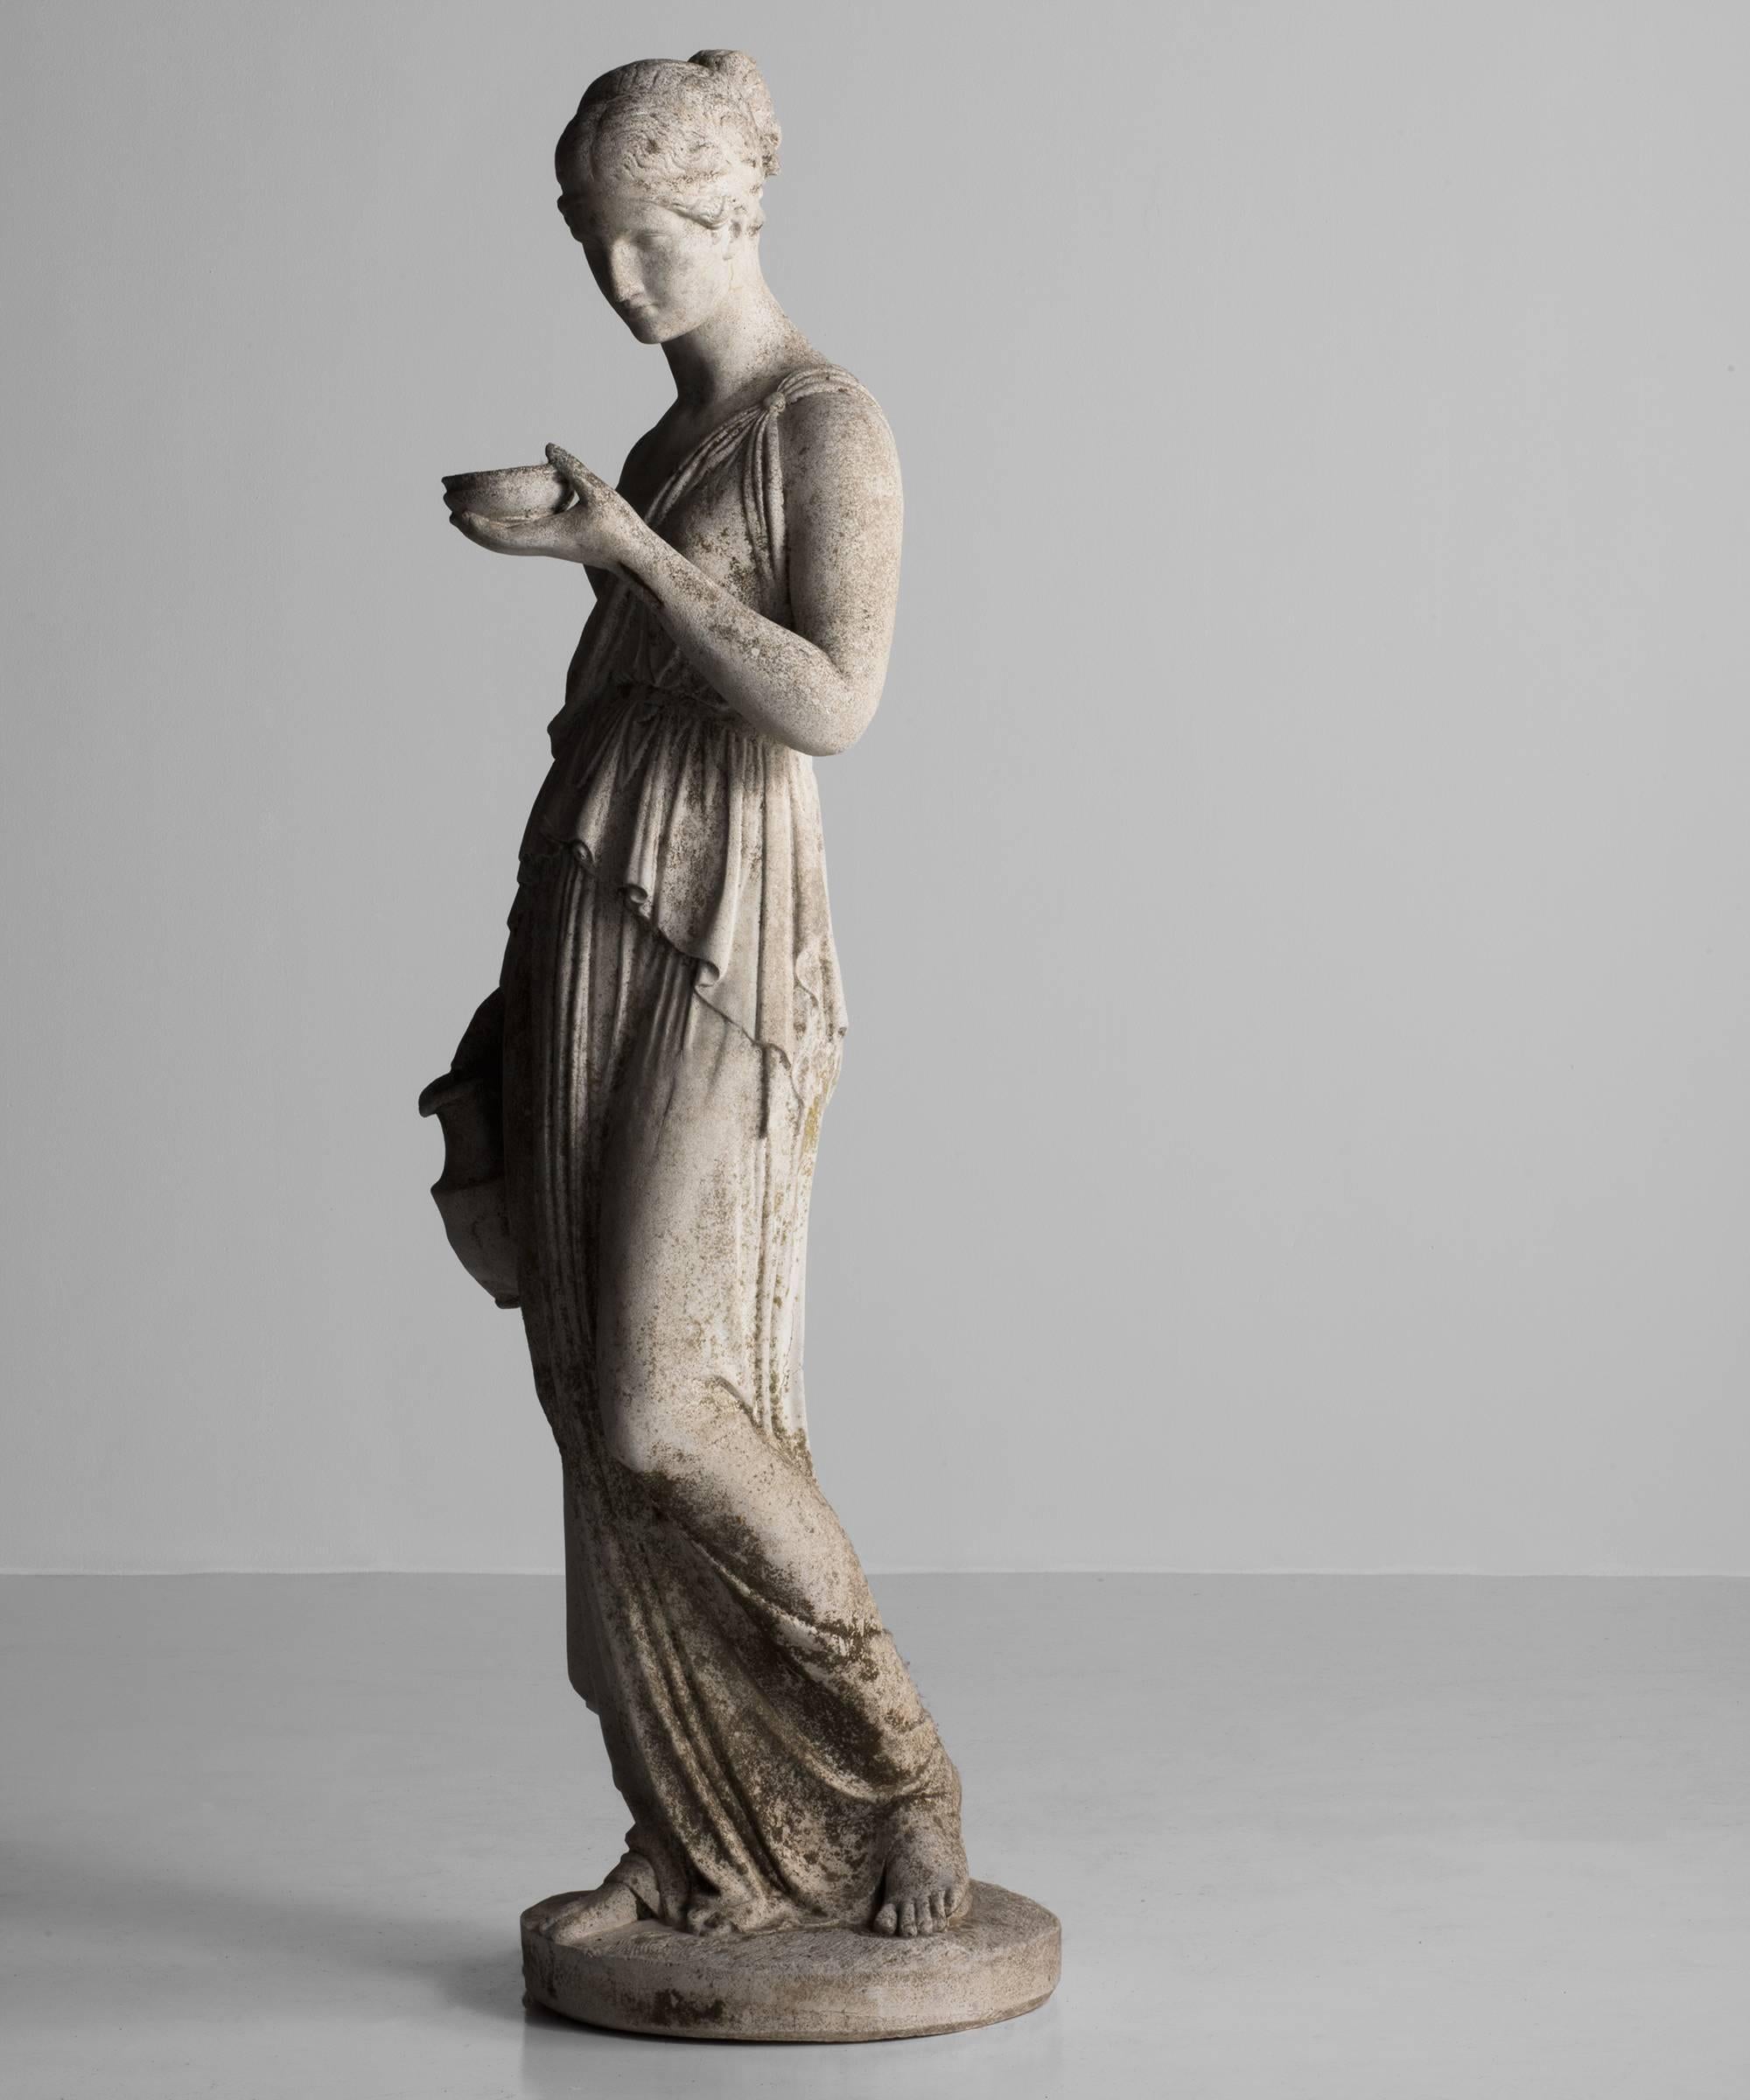 Italy, circa 1920.
Lifesize statue of women in a toga, made of cast limestone.